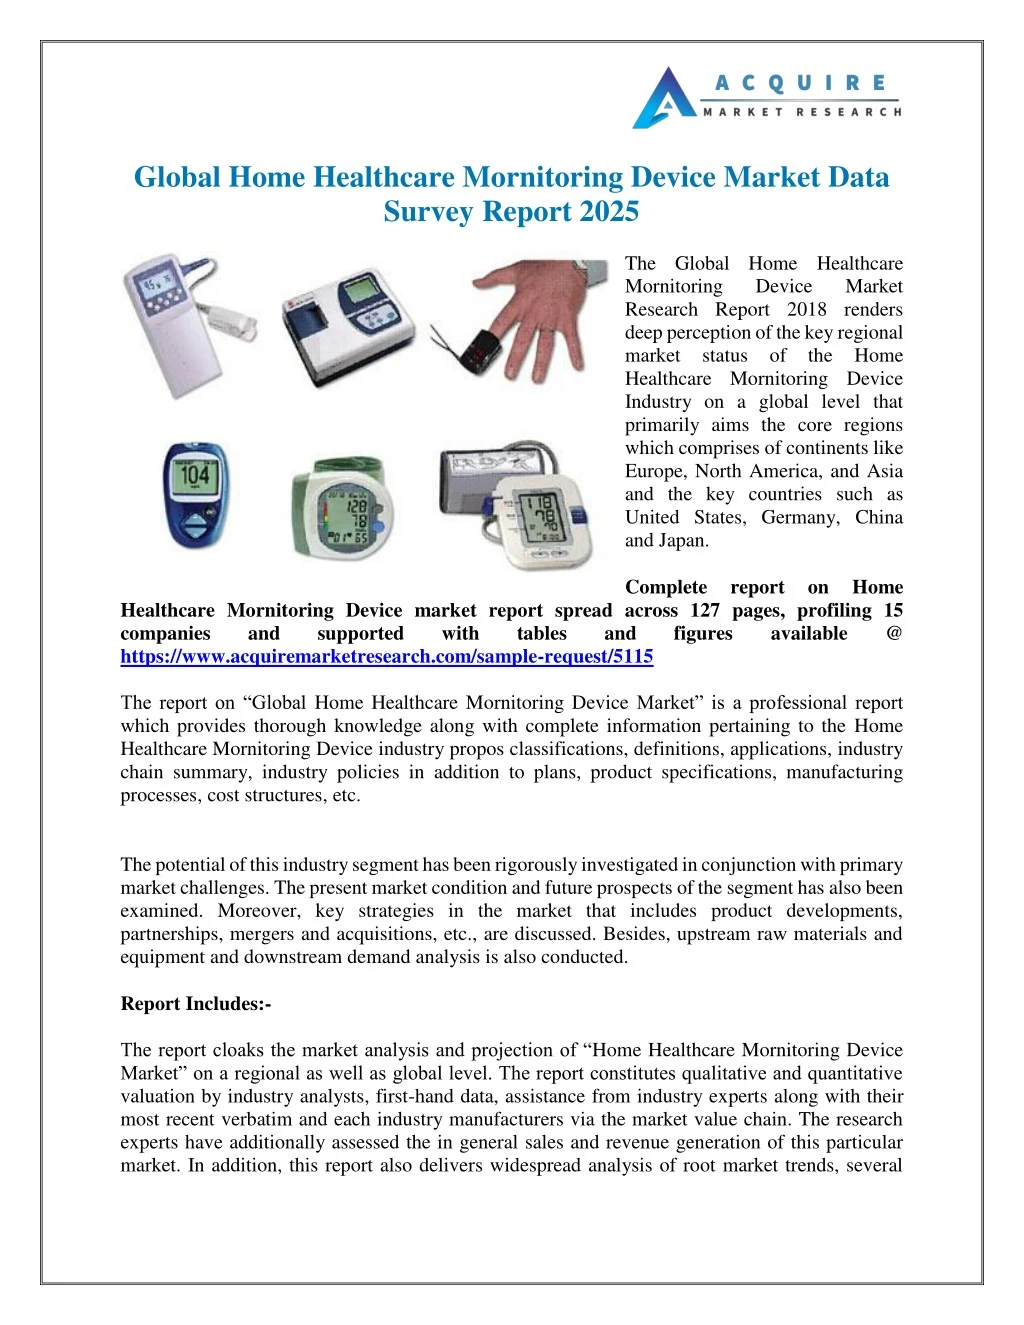 global home healthcare mornitoring device market